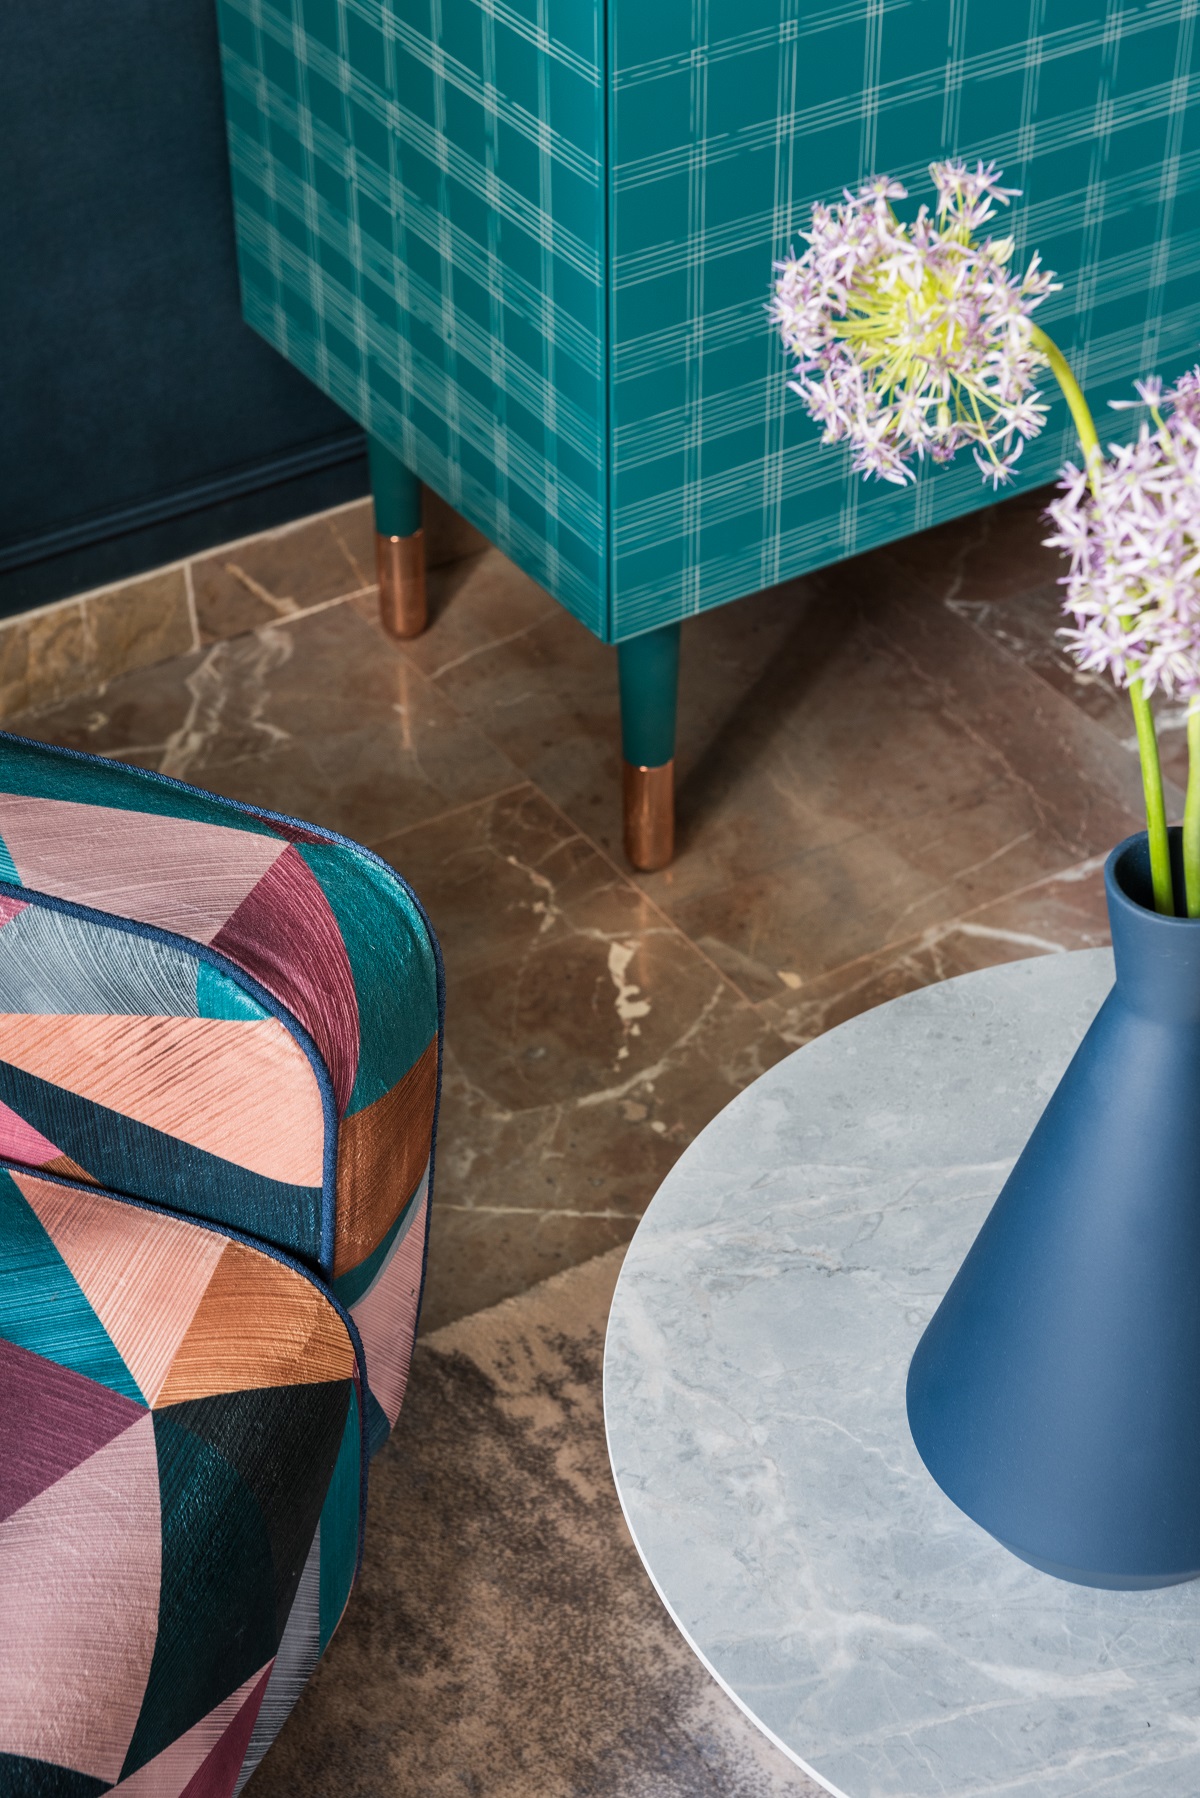 detail of corner of colourful chair, marble flooring, blue cabinet and table with flowers